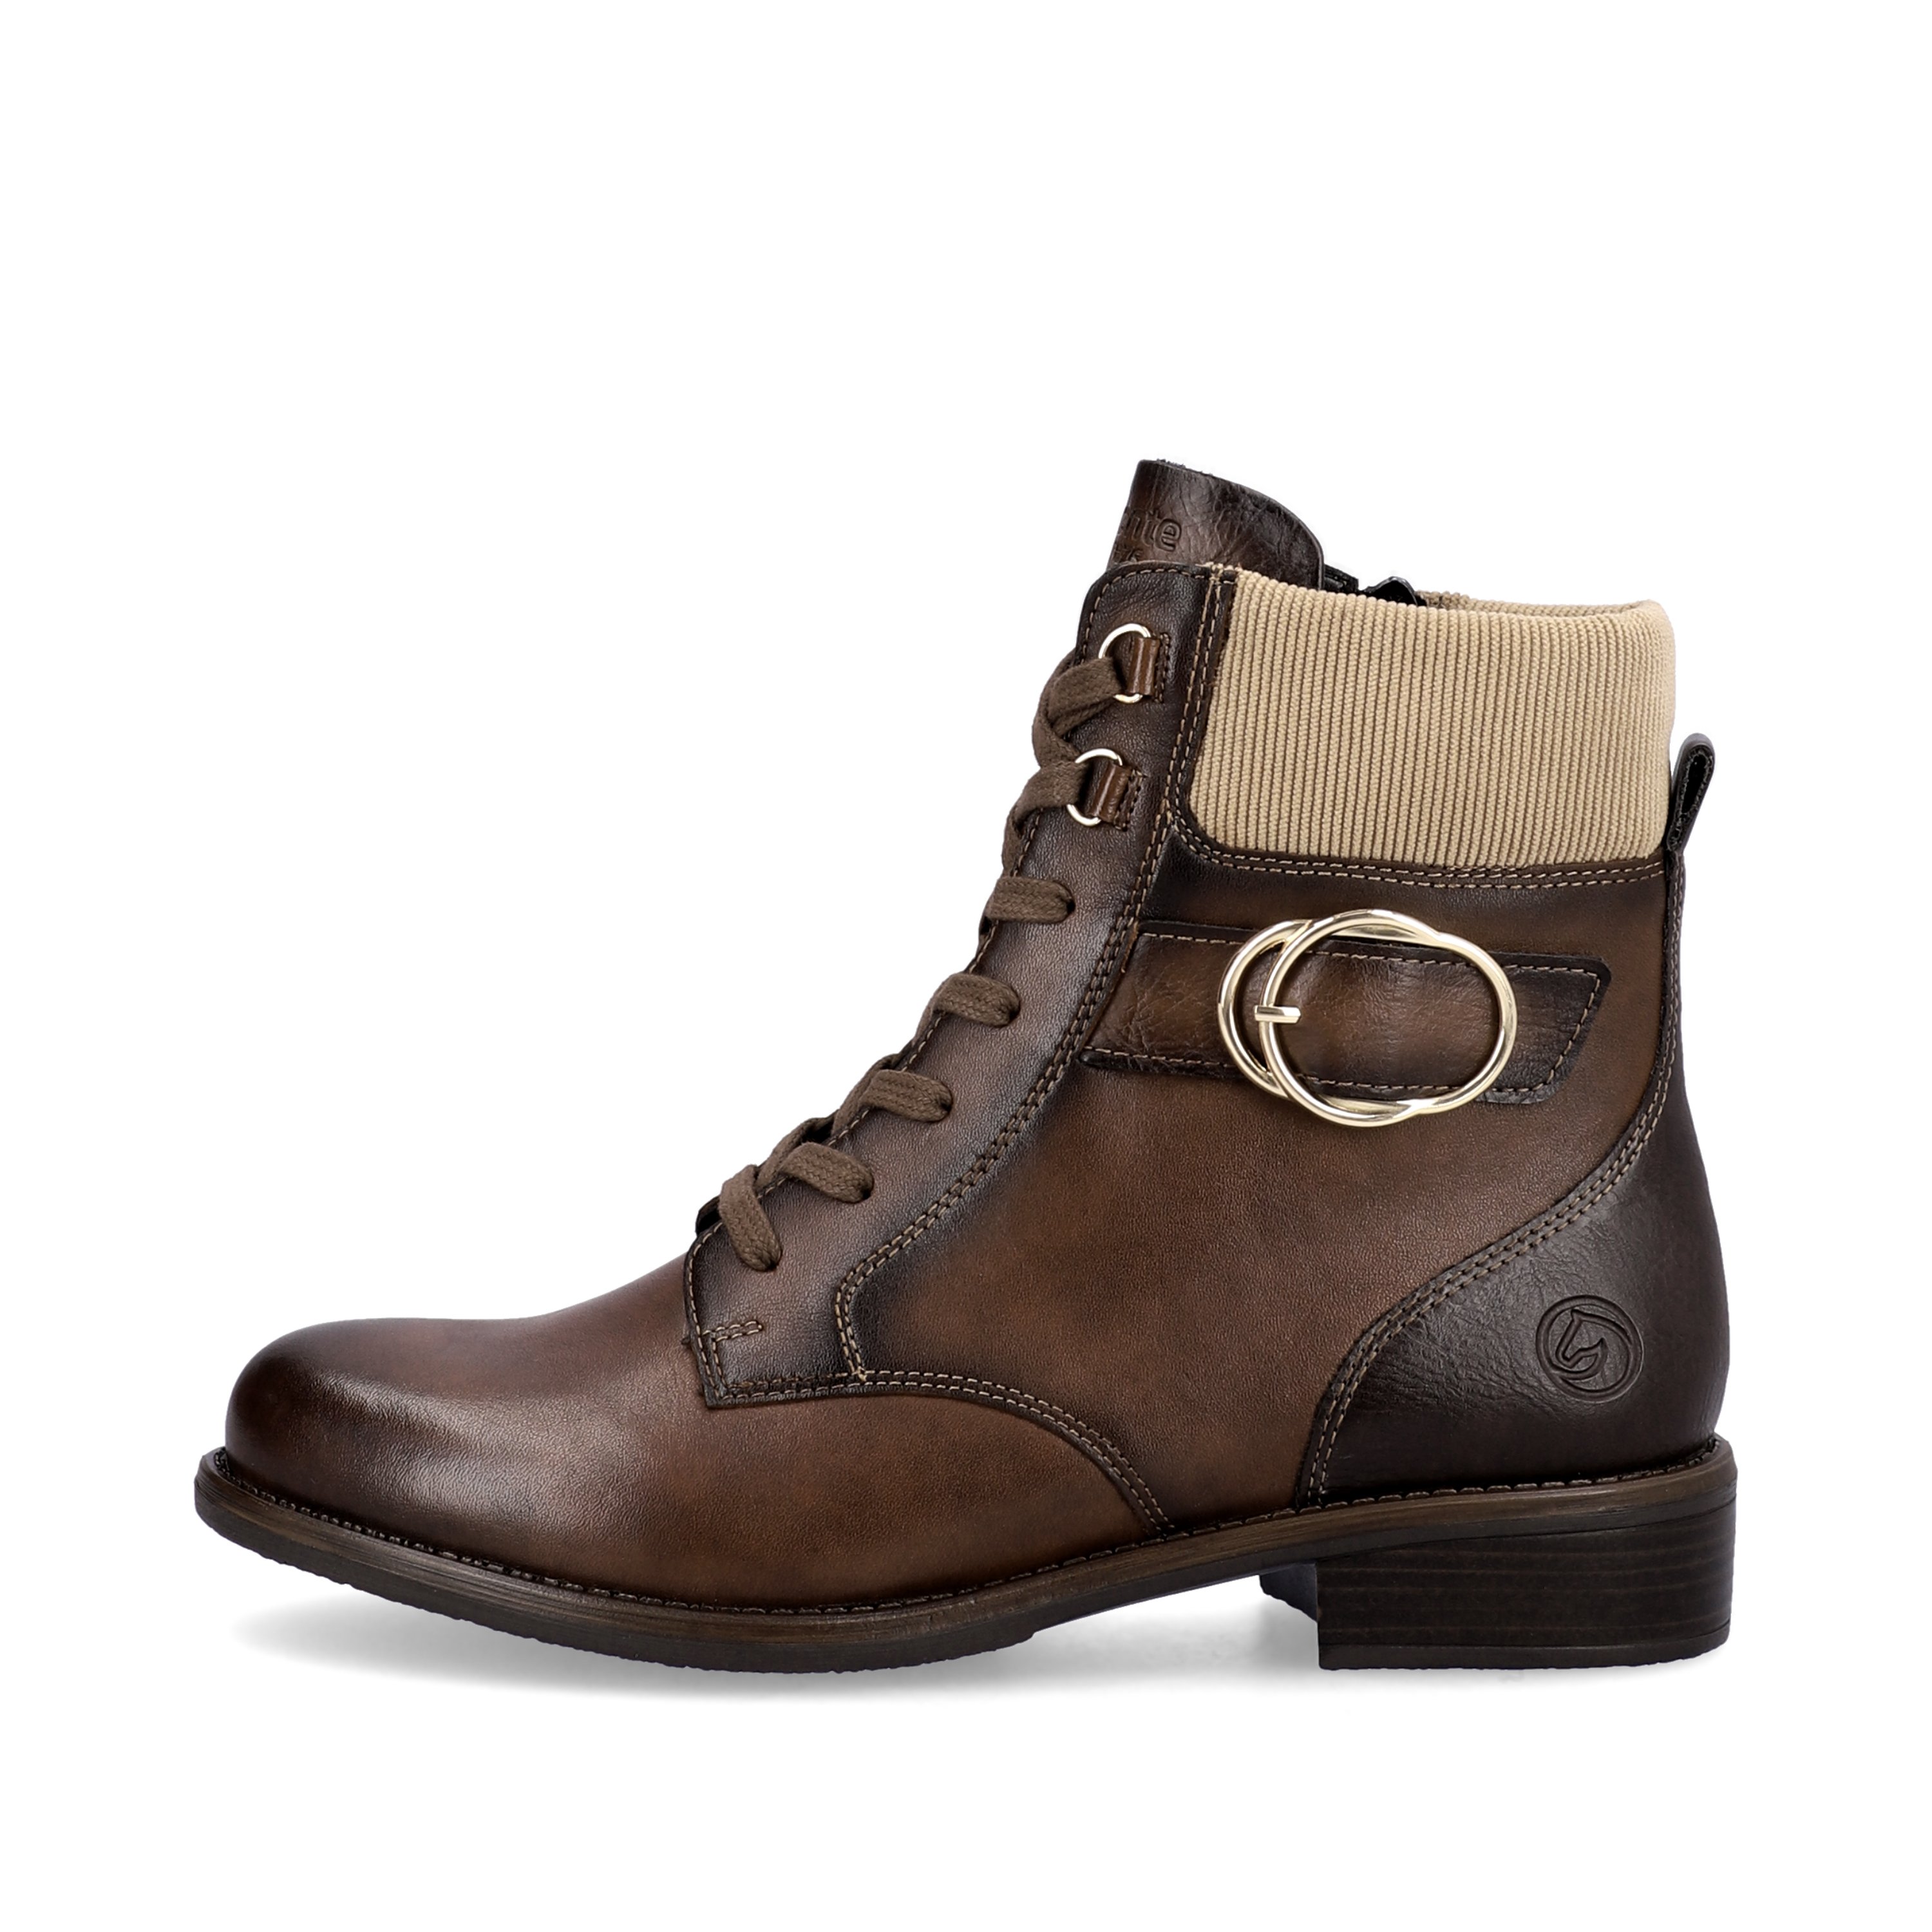 Maroon remonte women´s biker boots D0F76-22 with light sole with block heel. The outside of the shoe